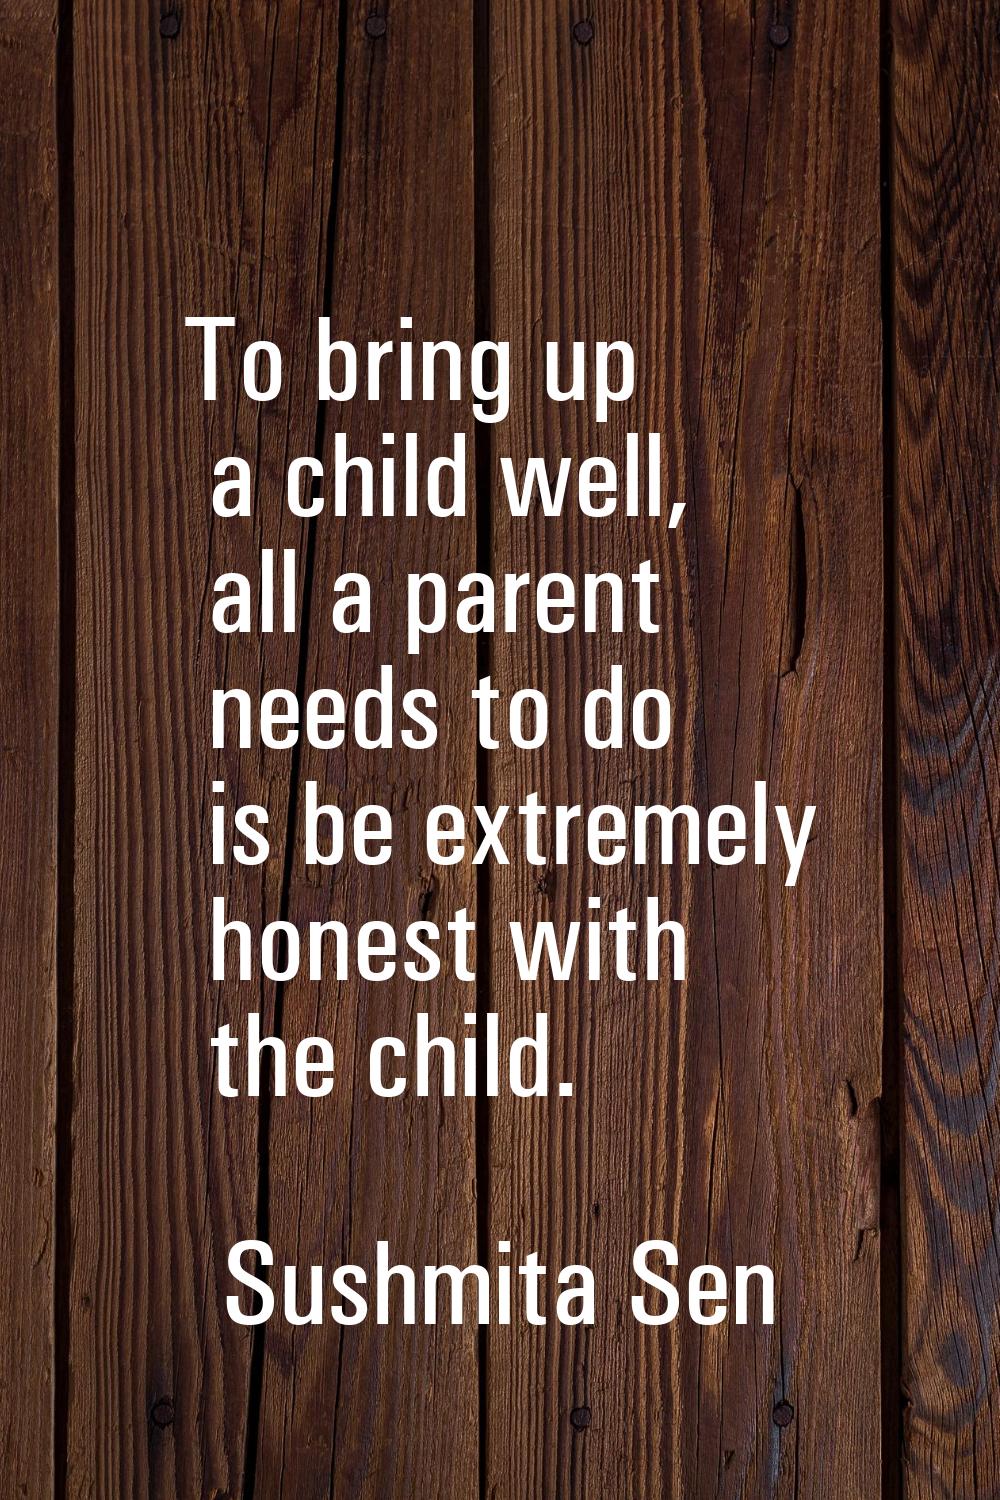 To bring up a child well, all a parent needs to do is be extremely honest with the child.